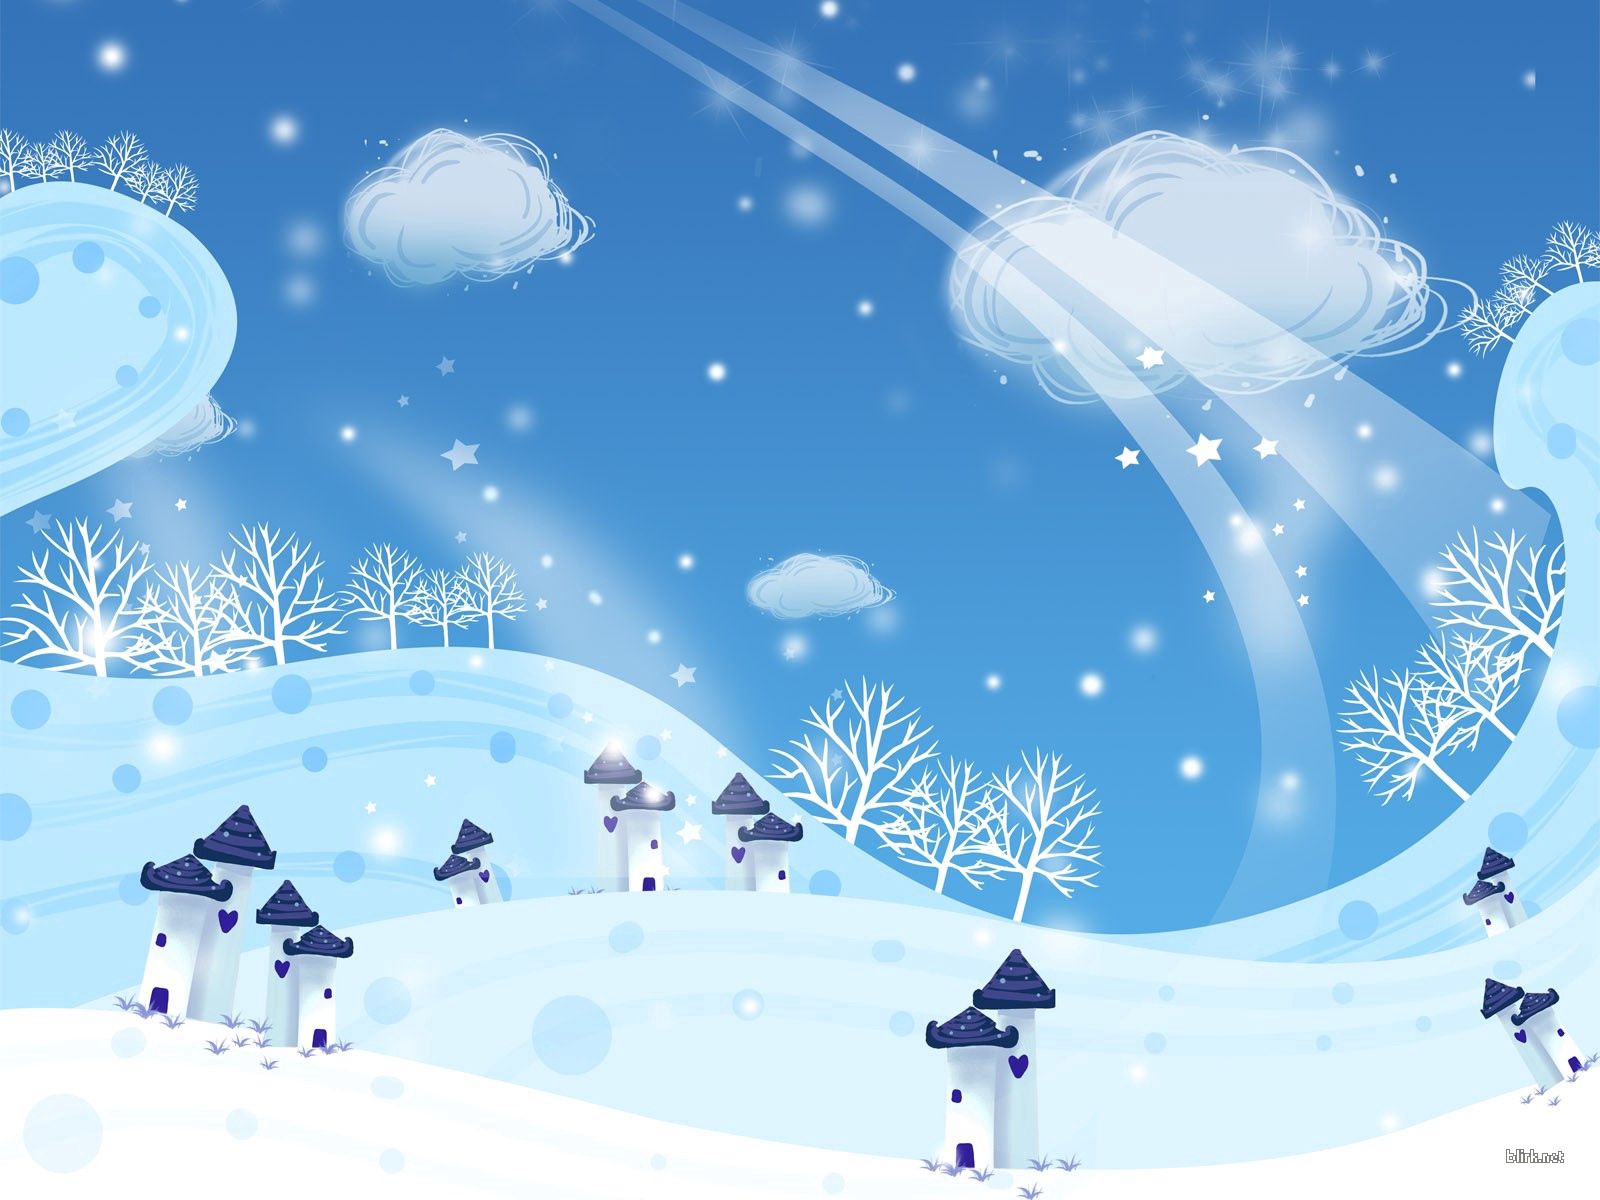 Download PC Wallpaper holidays, winter, houses, new year, snow, christmas, snowstorm, winter storm